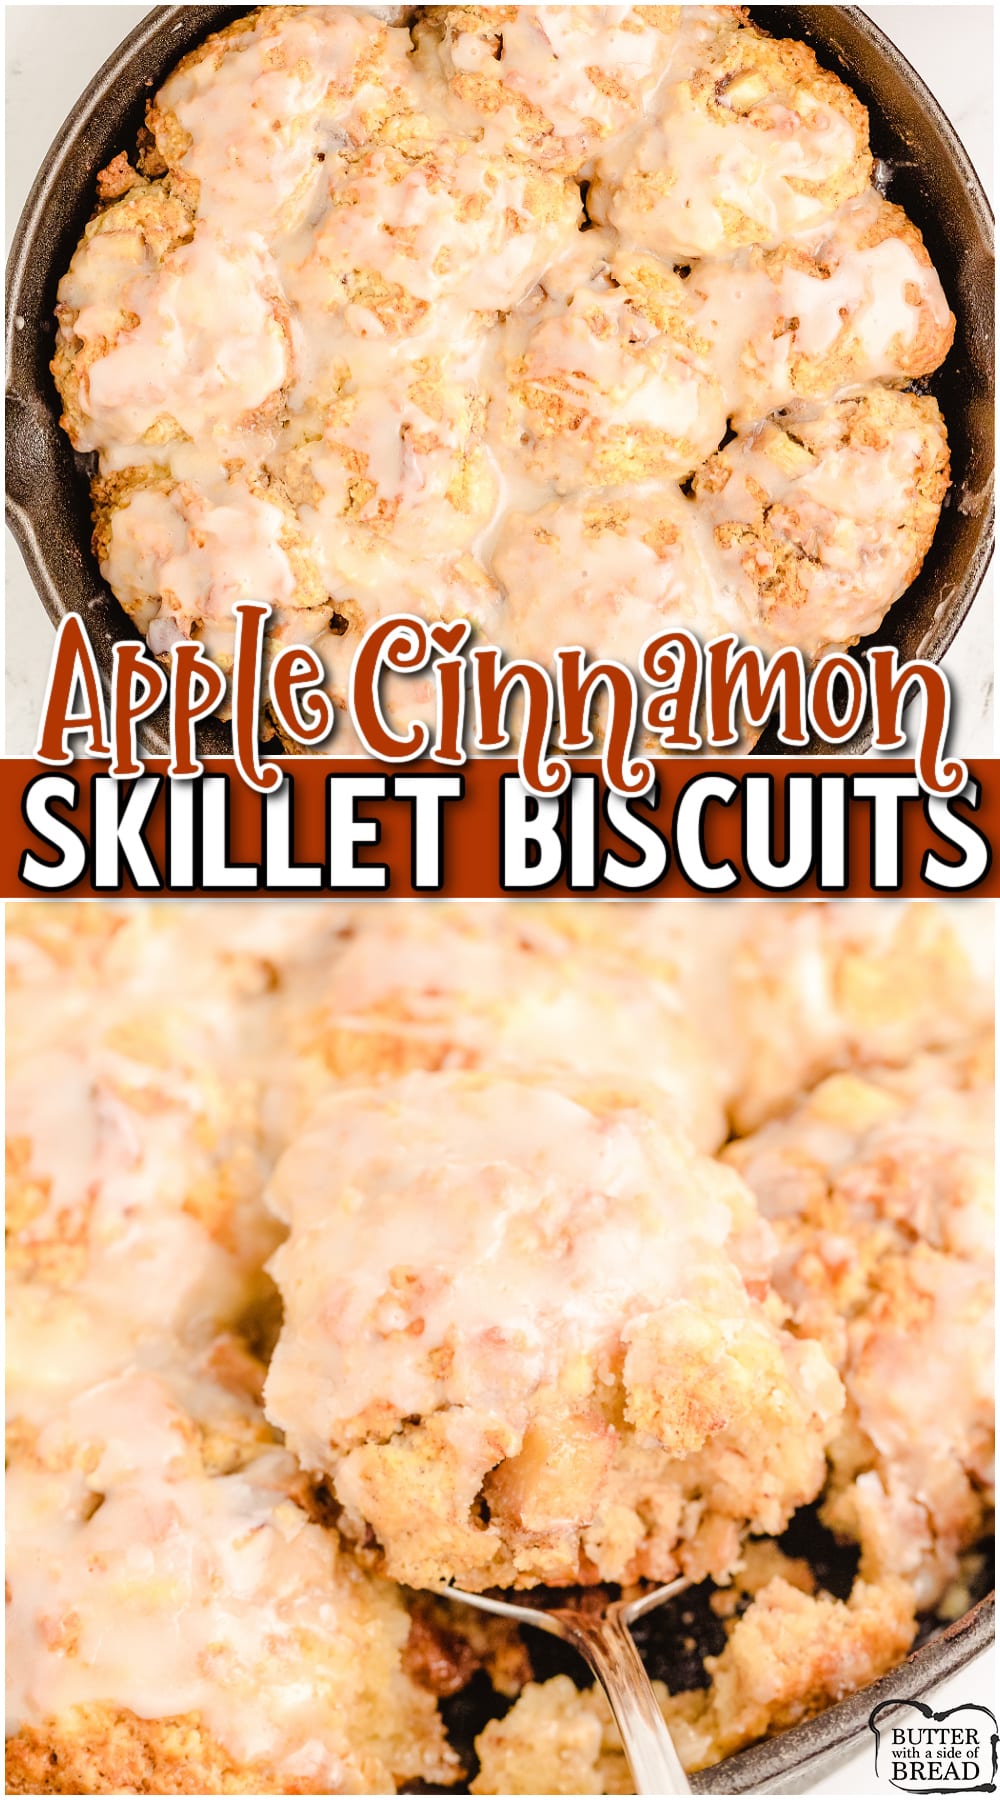 Tender, sweet Apple Cinnamon Biscuits made with simple ingredients & baked in a cast iron skillet dotted with butter! Amazing cinnamon biscuits drizzled with a warm vanilla glaze.